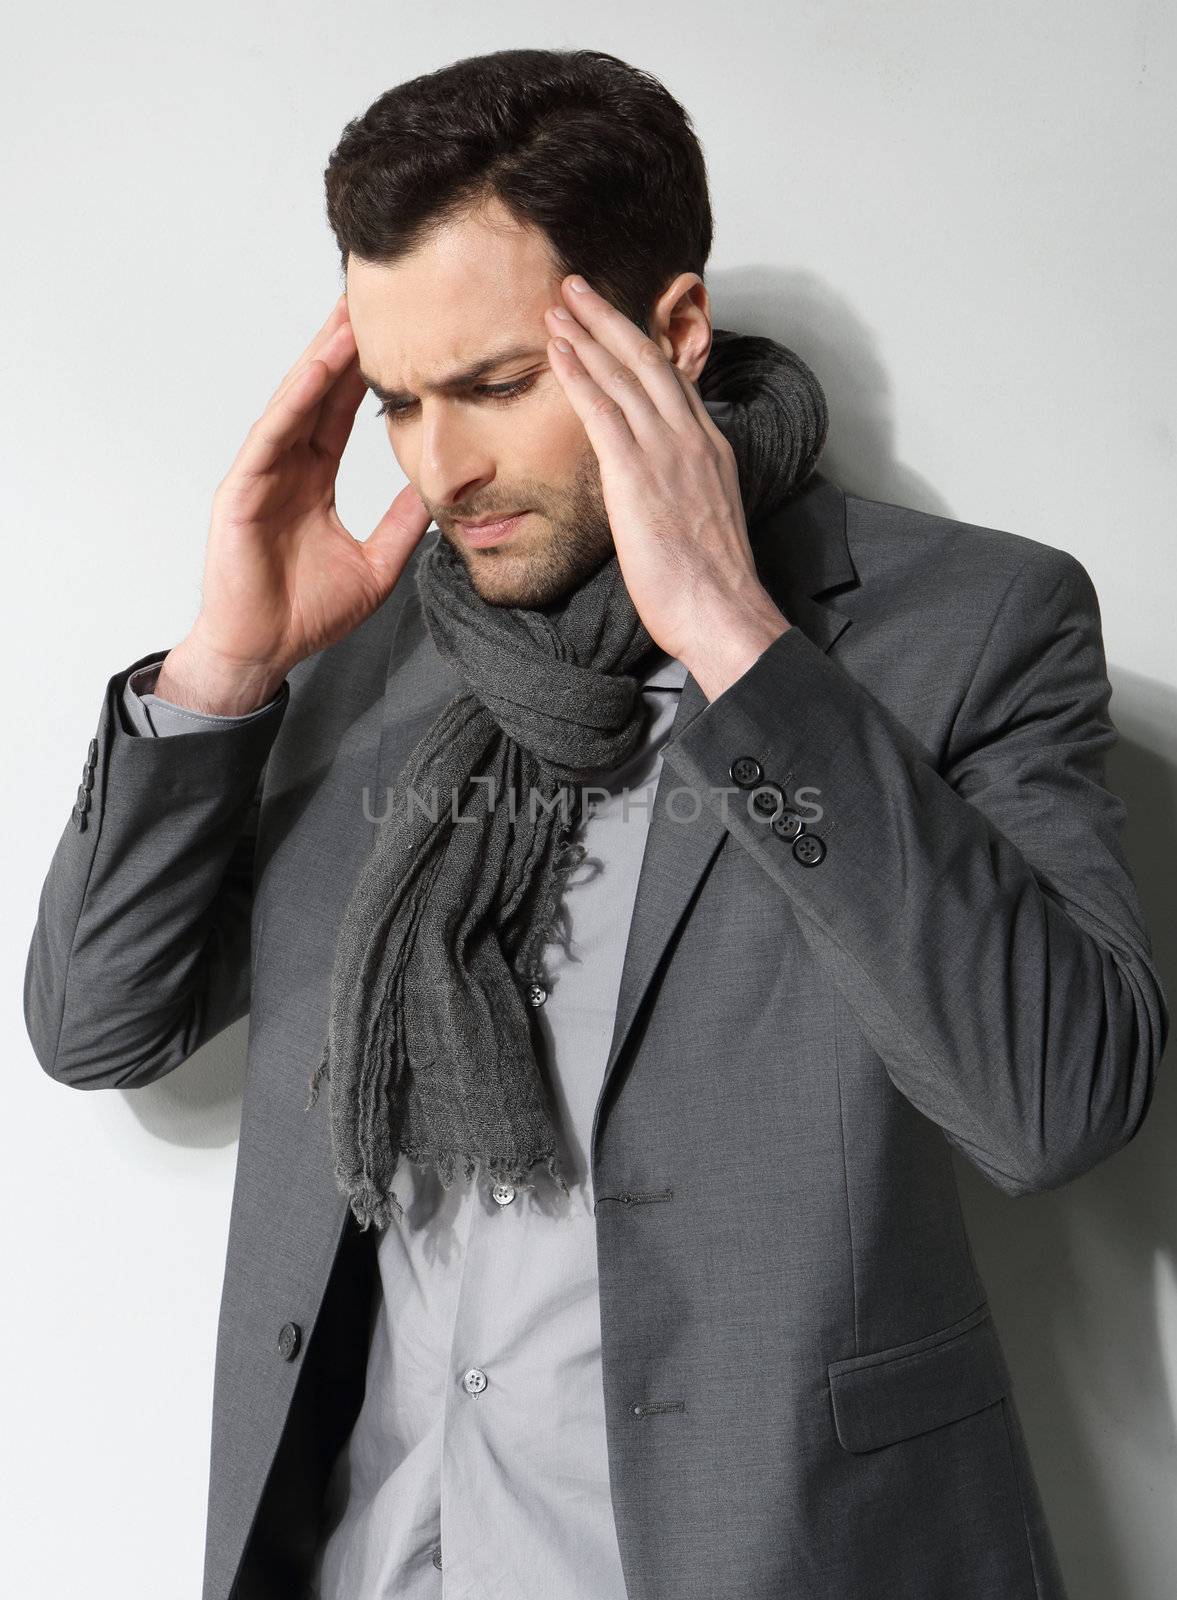 Stressed businessman with a headache on a gray background